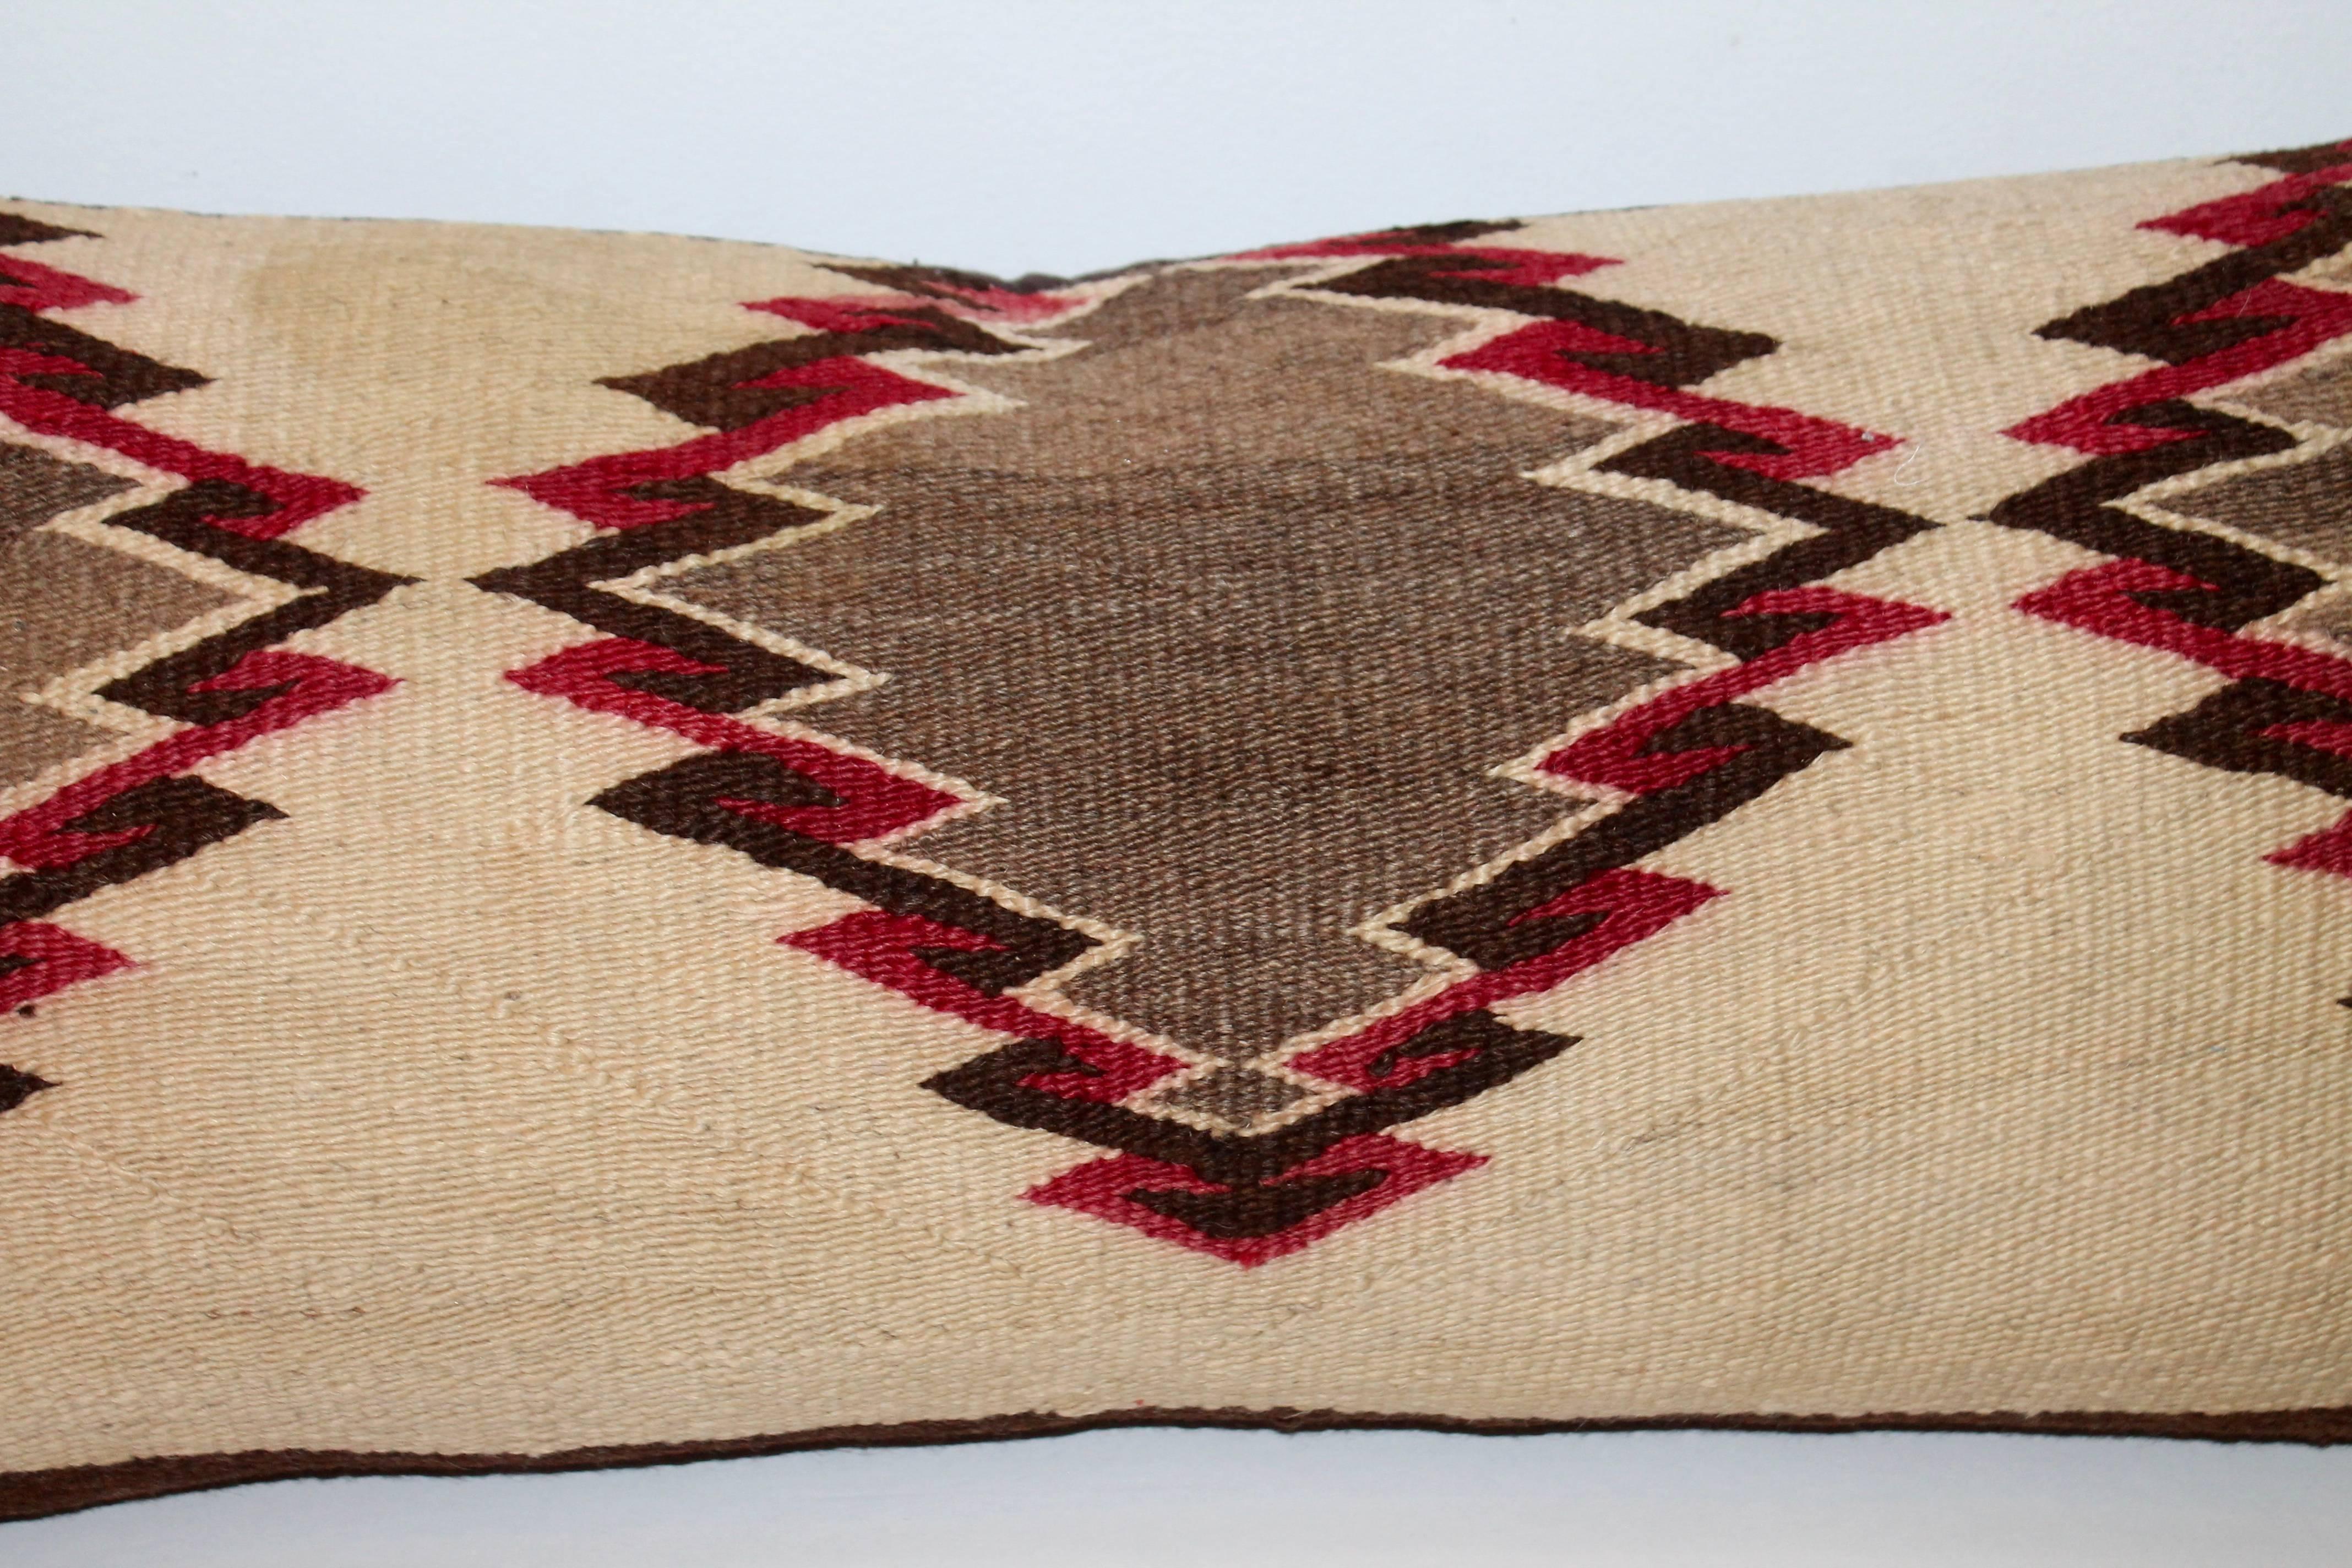 This geometric early weaving is in fine condition with most unusual colors of mauve and tan. The backing is in a brown cotton linen.